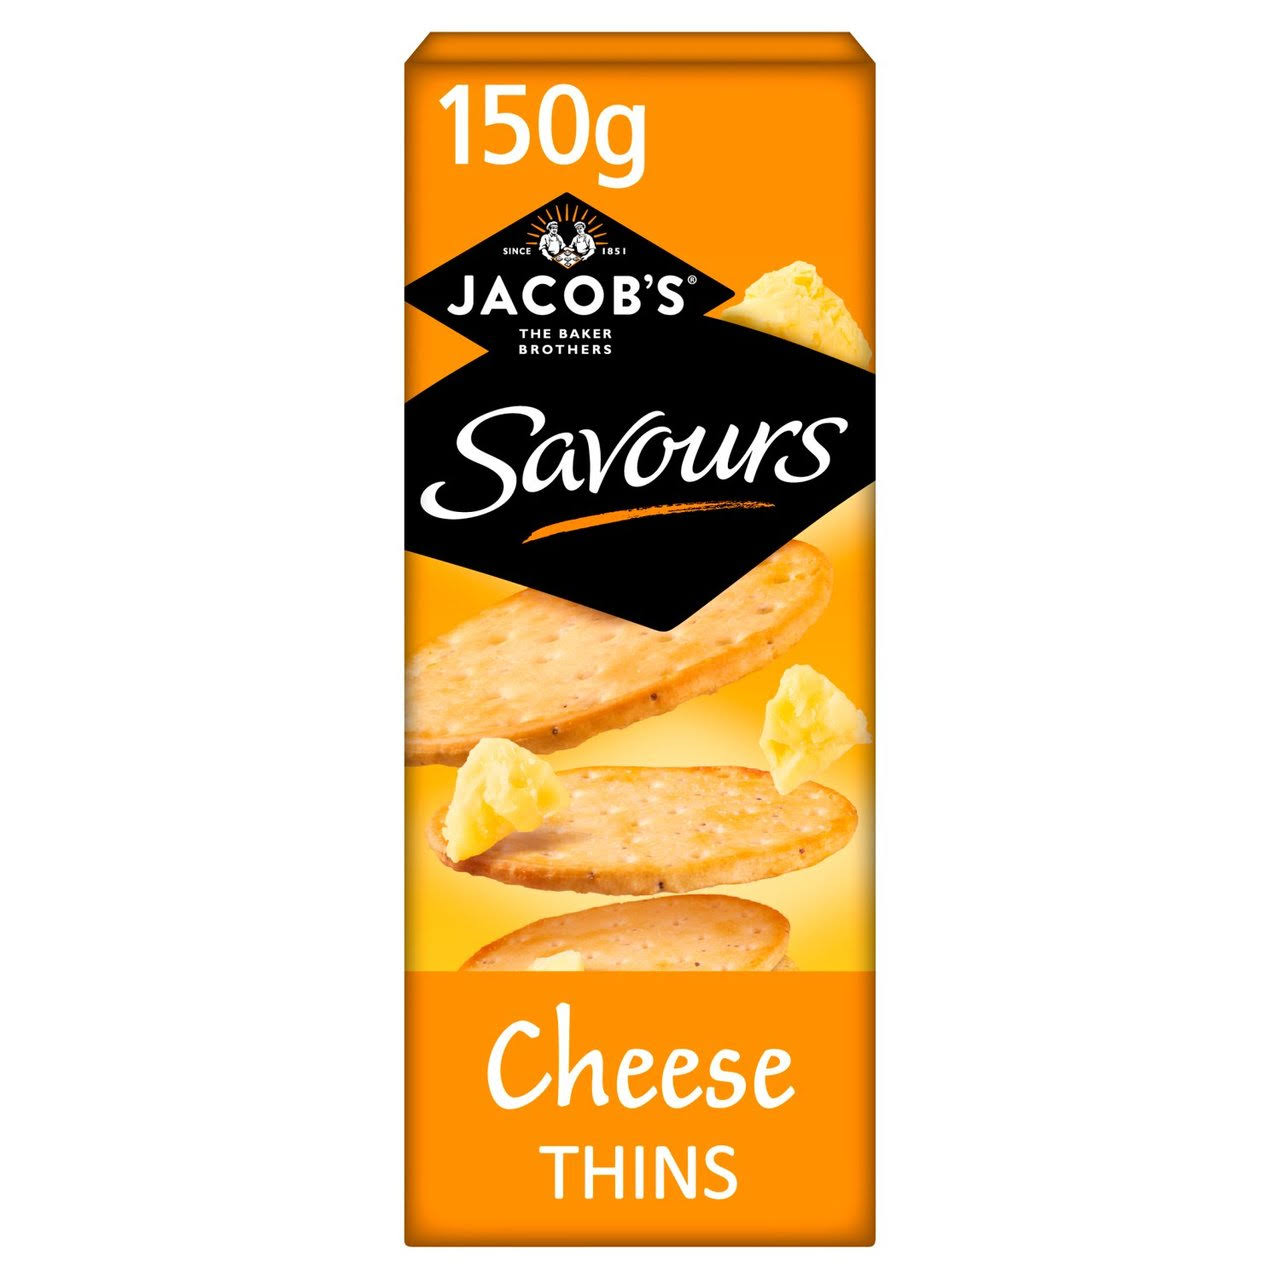 Jacob's Cheese Savours 150g